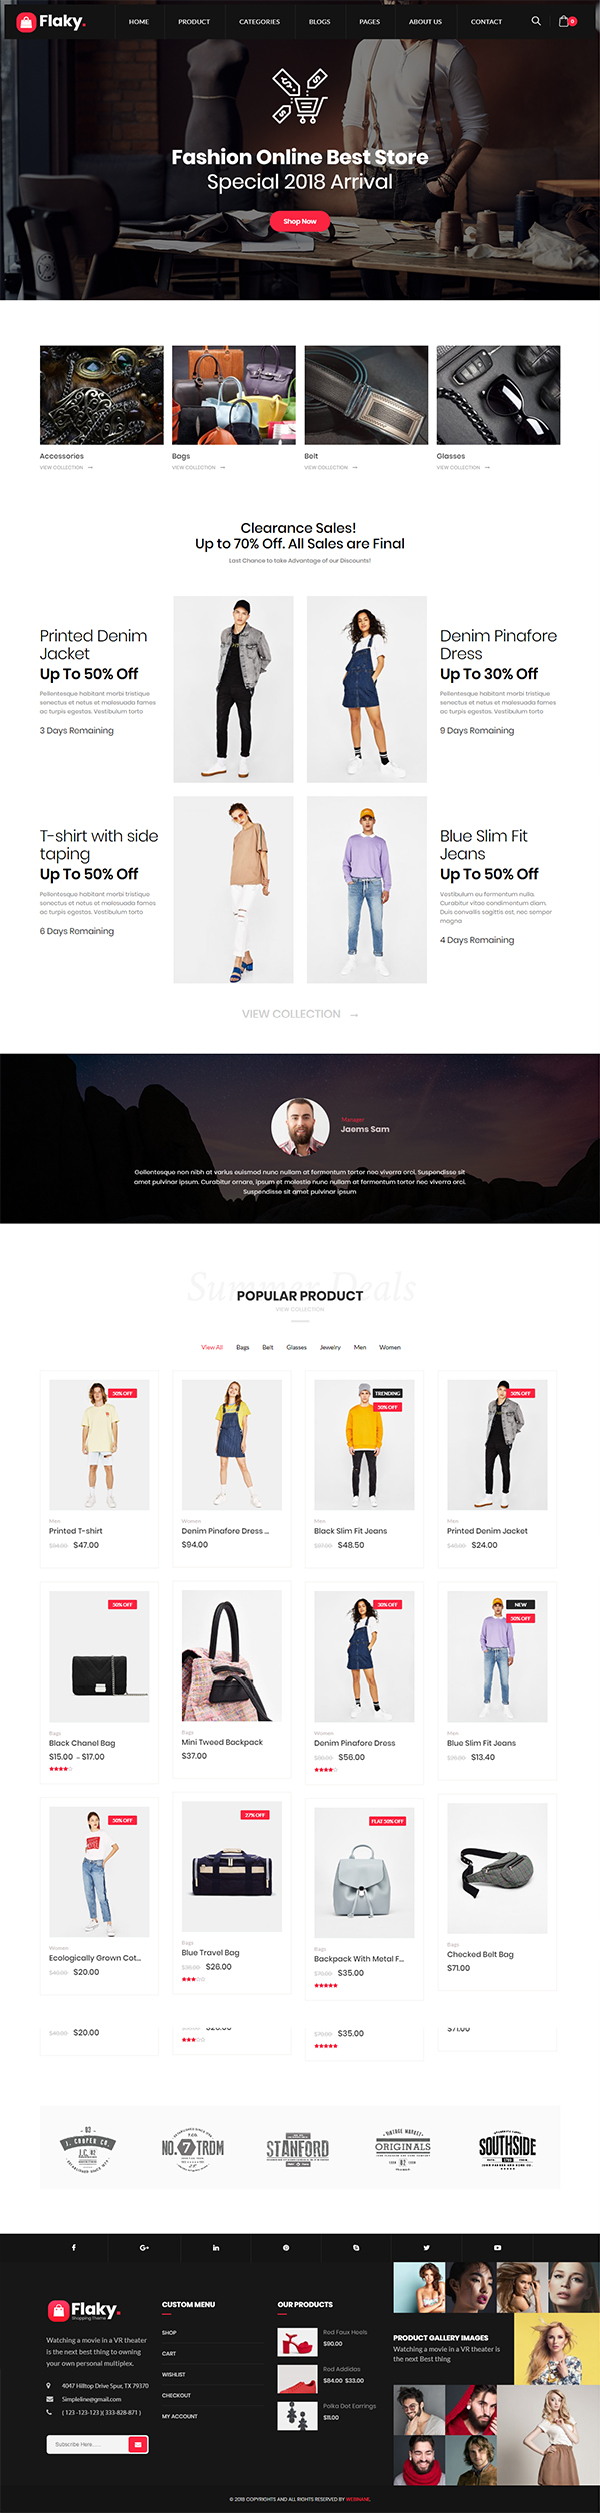 Flaky – A Responsive WooCommerce Theme for Online Shopping Websites